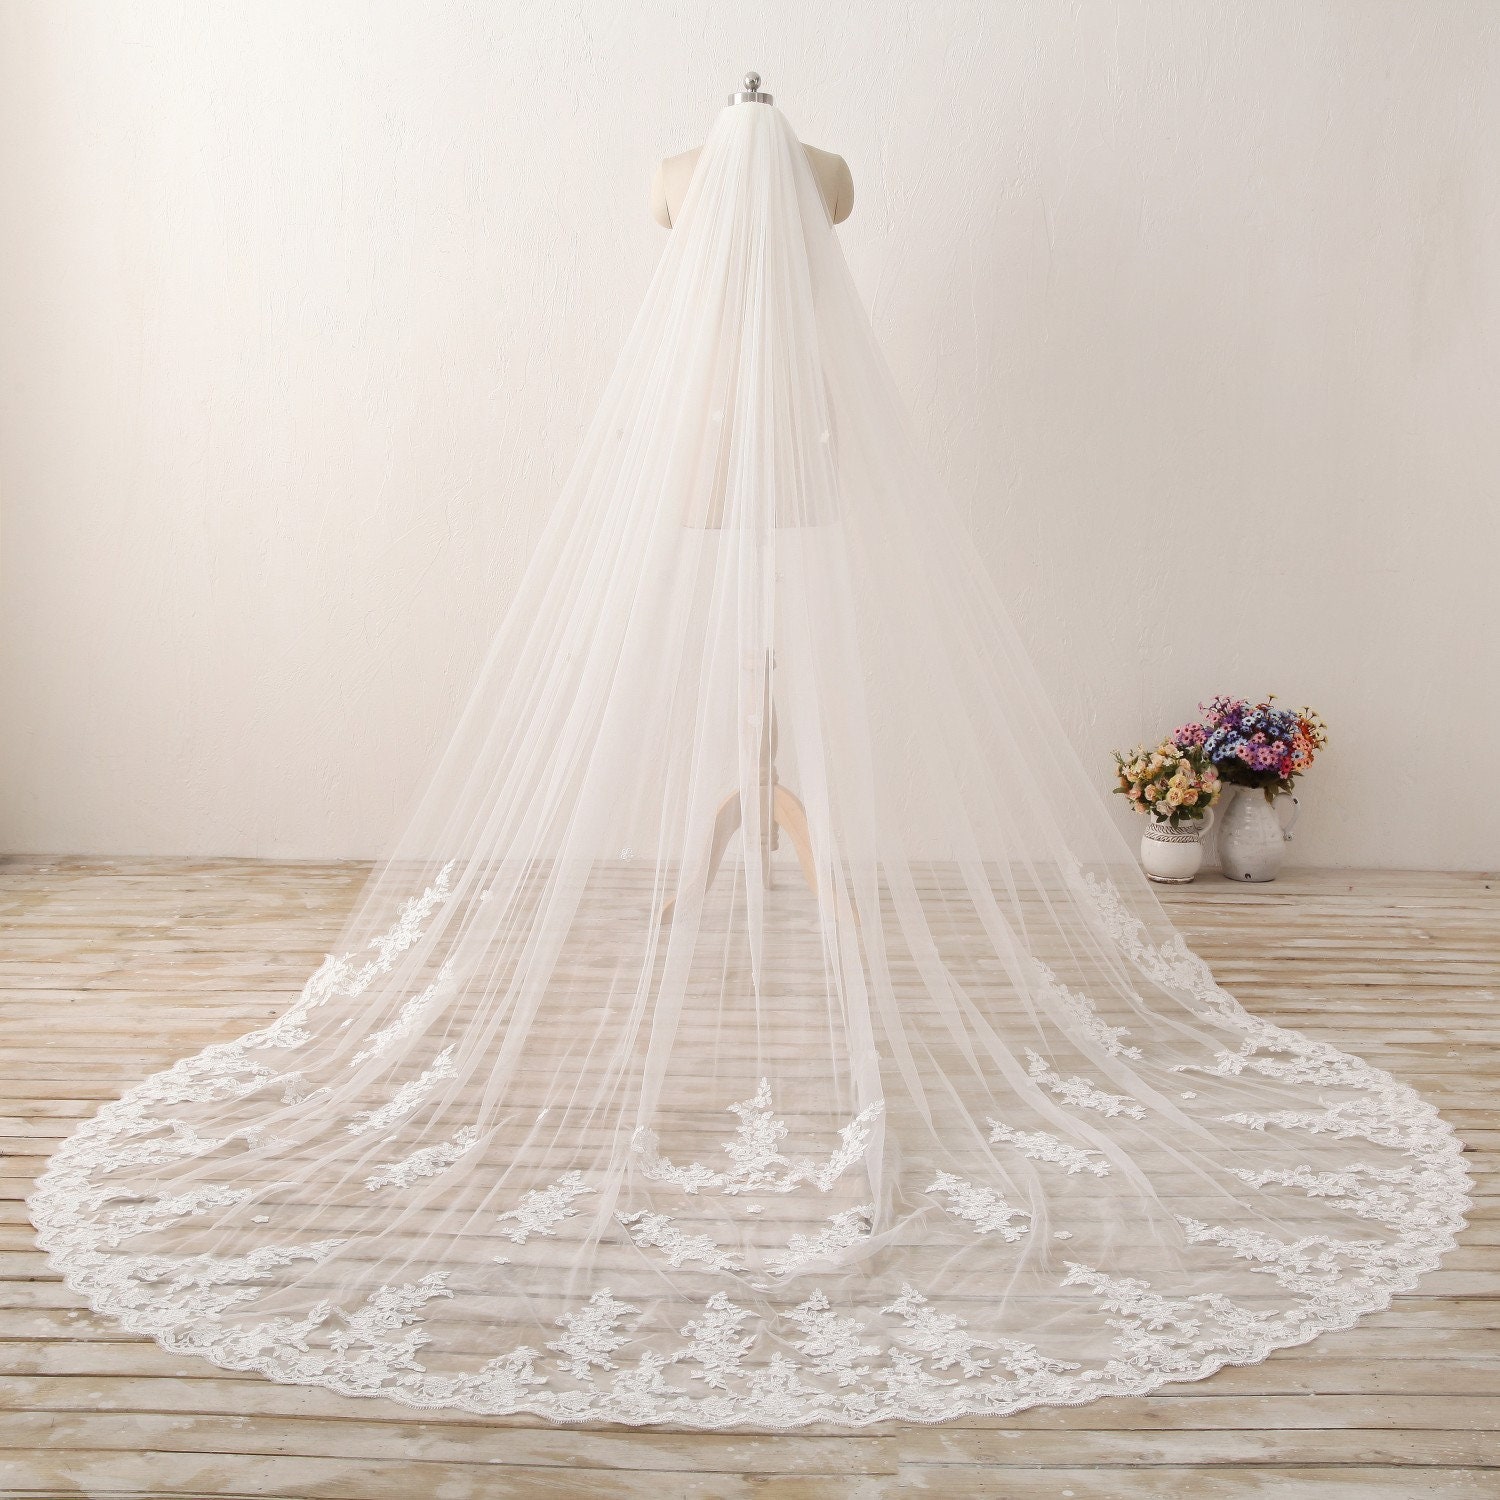 UK White Ivory 1T Cathedral Applique Edge Lace Bridal Wedding Veil With Comb 3M 